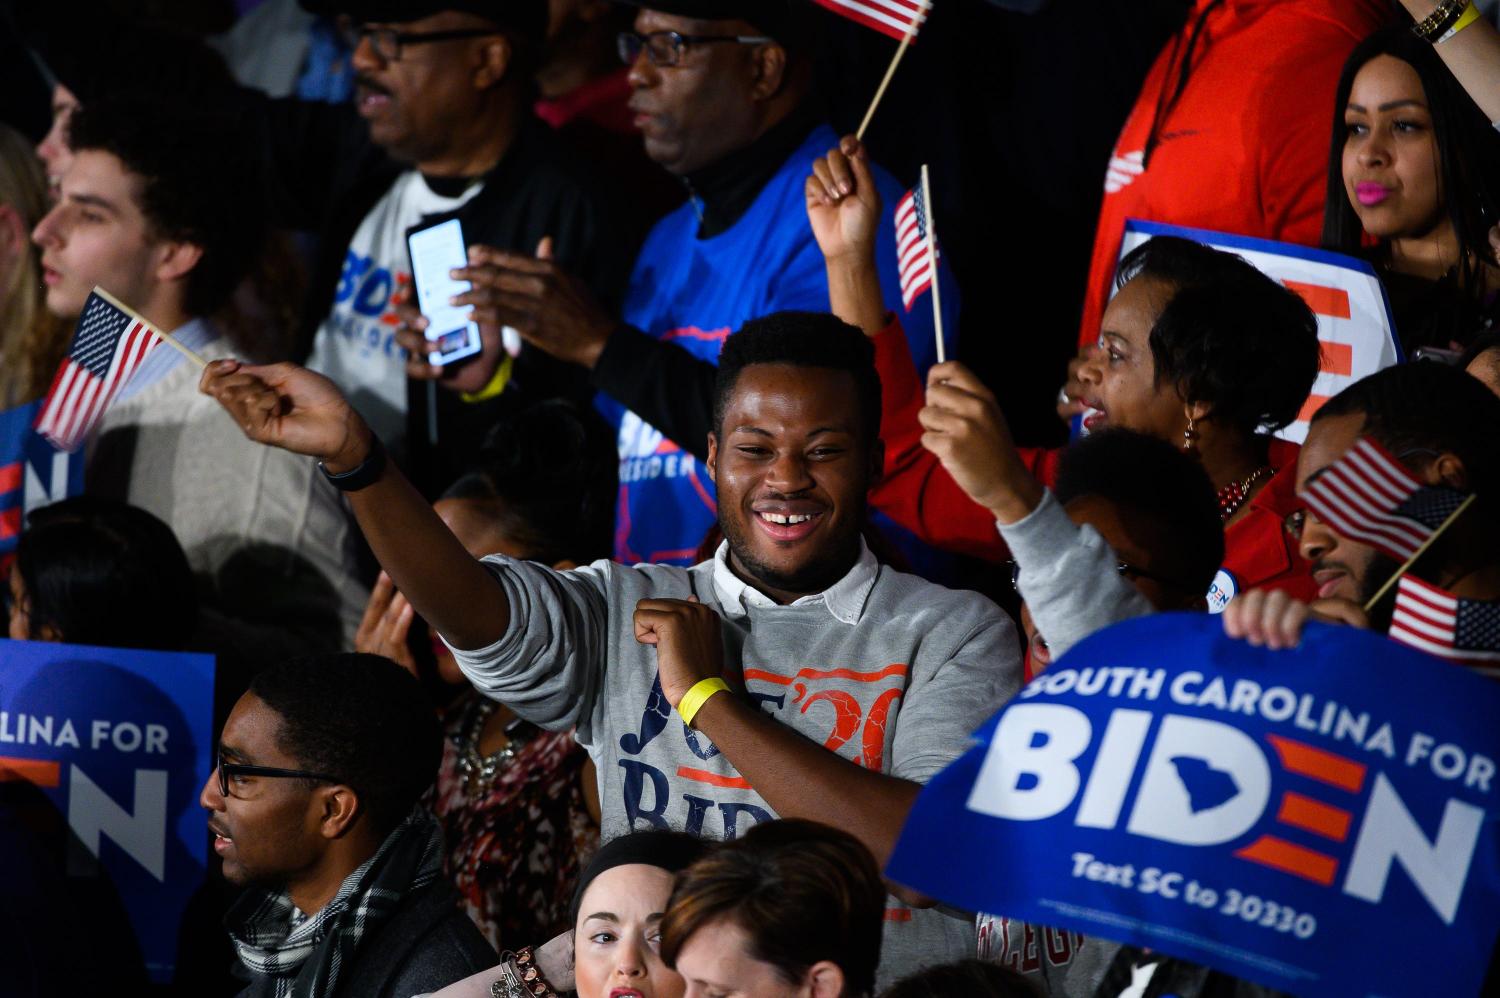 Supporters of democratic presidential candidate Joe Biden cheer during a rally in Columbia after his victory in the South Carolina primary Saturday, Feb. 29, 2020.Jm Biden 022920 046